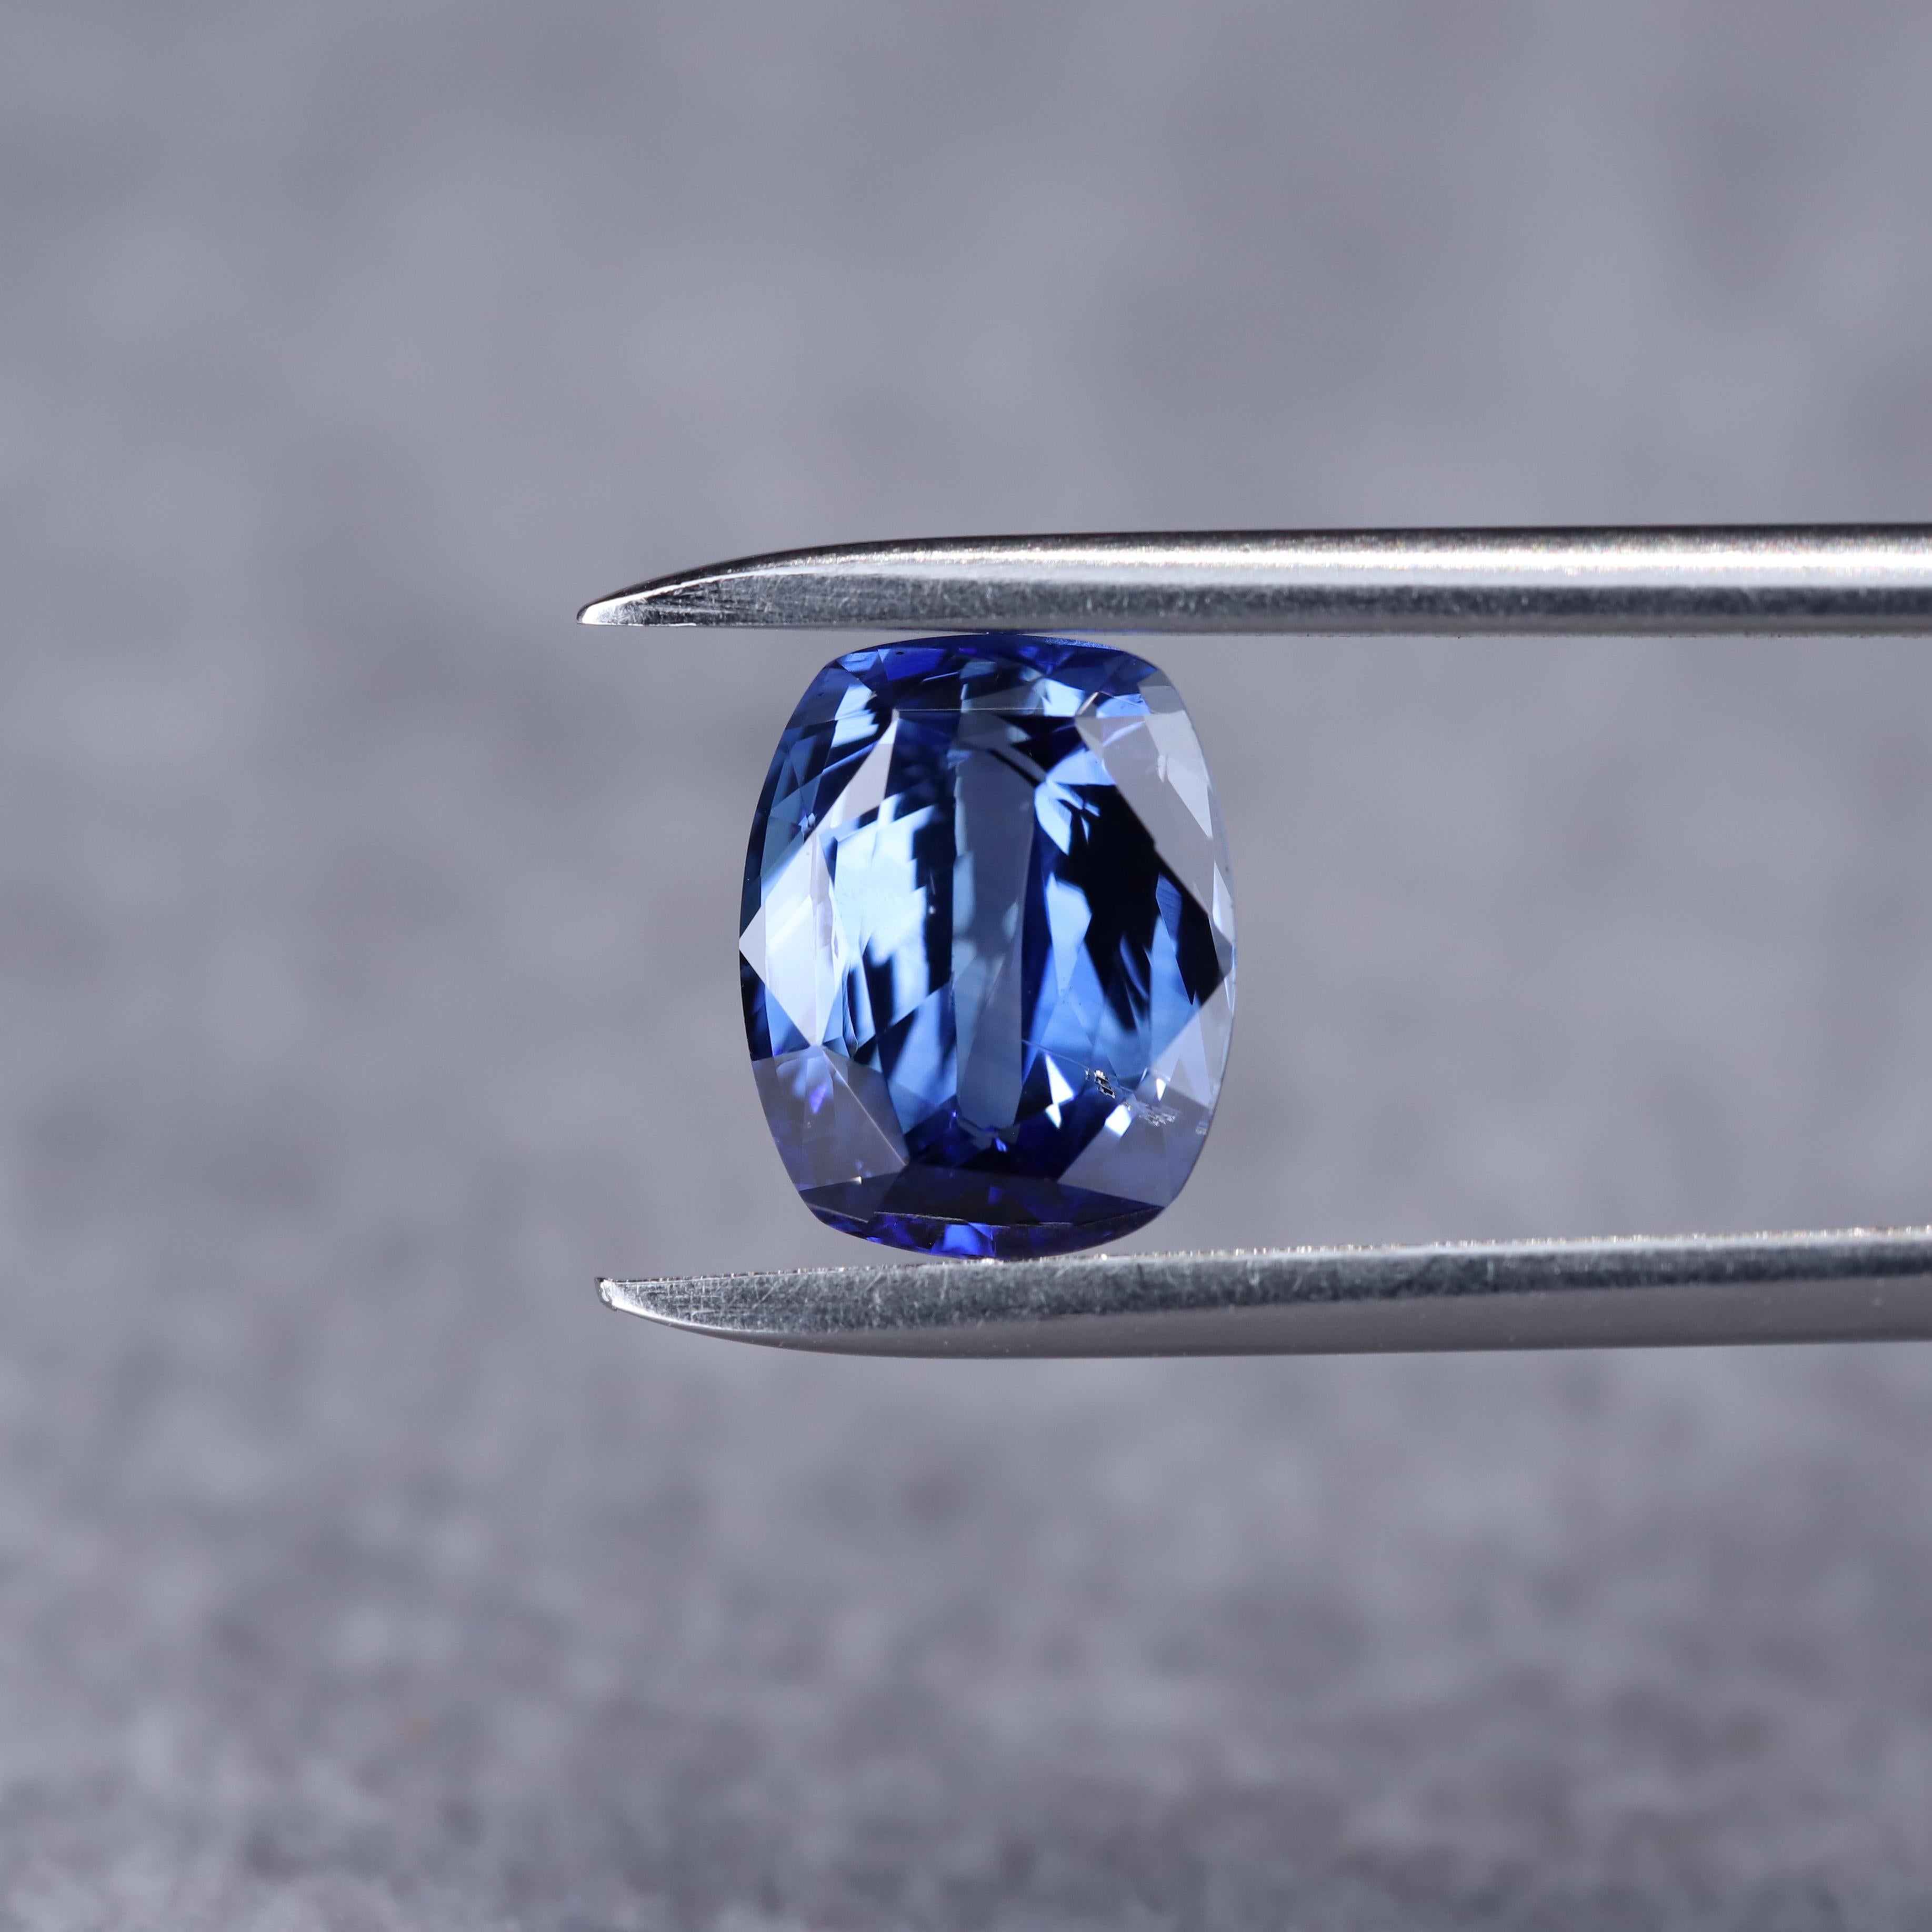 A natural sapphire flaunting hues of clear blue skies tinged with tones of vivid blue in the corners, casting an ombre-like effect within the gem with each delicate movement. With its wide appearance and crisp cutting that brings about a magical